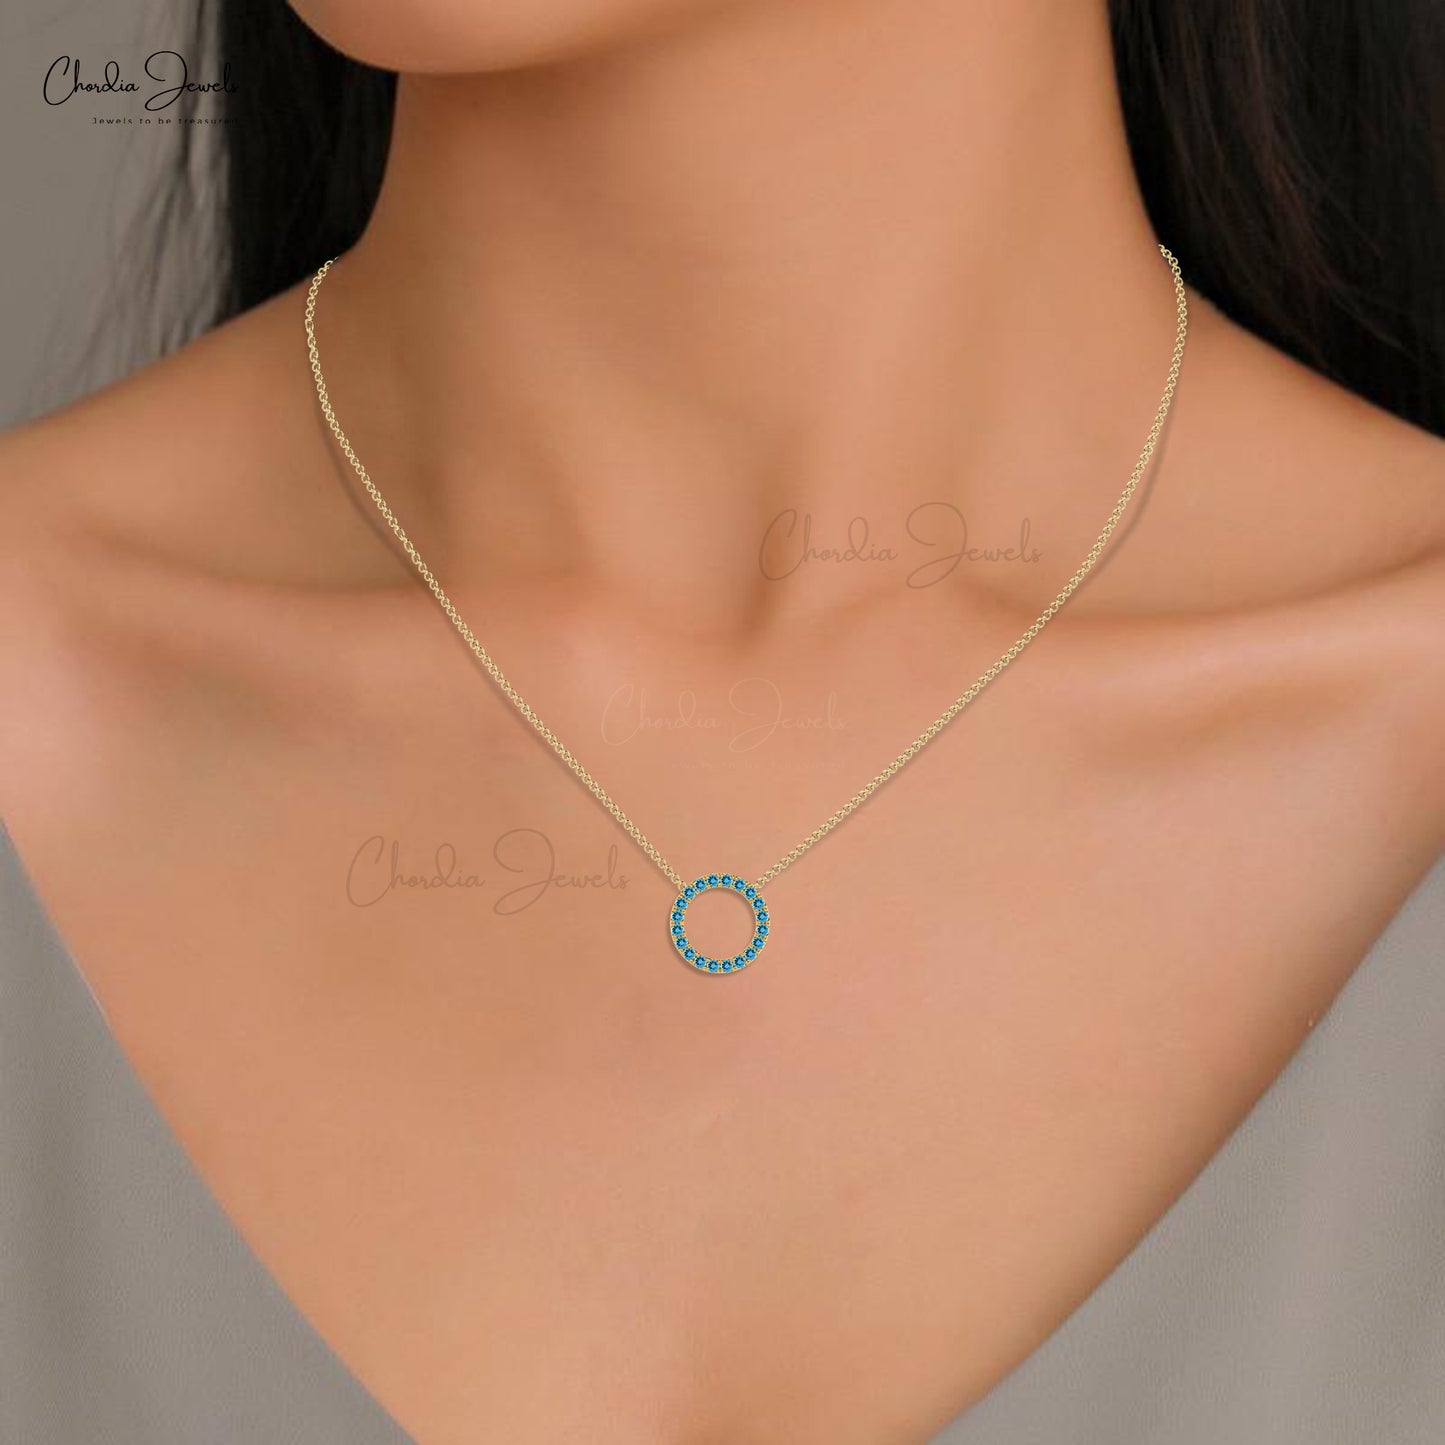 Natural Swiss Blue Topaz Dainty Circle Necklace For Anniversary